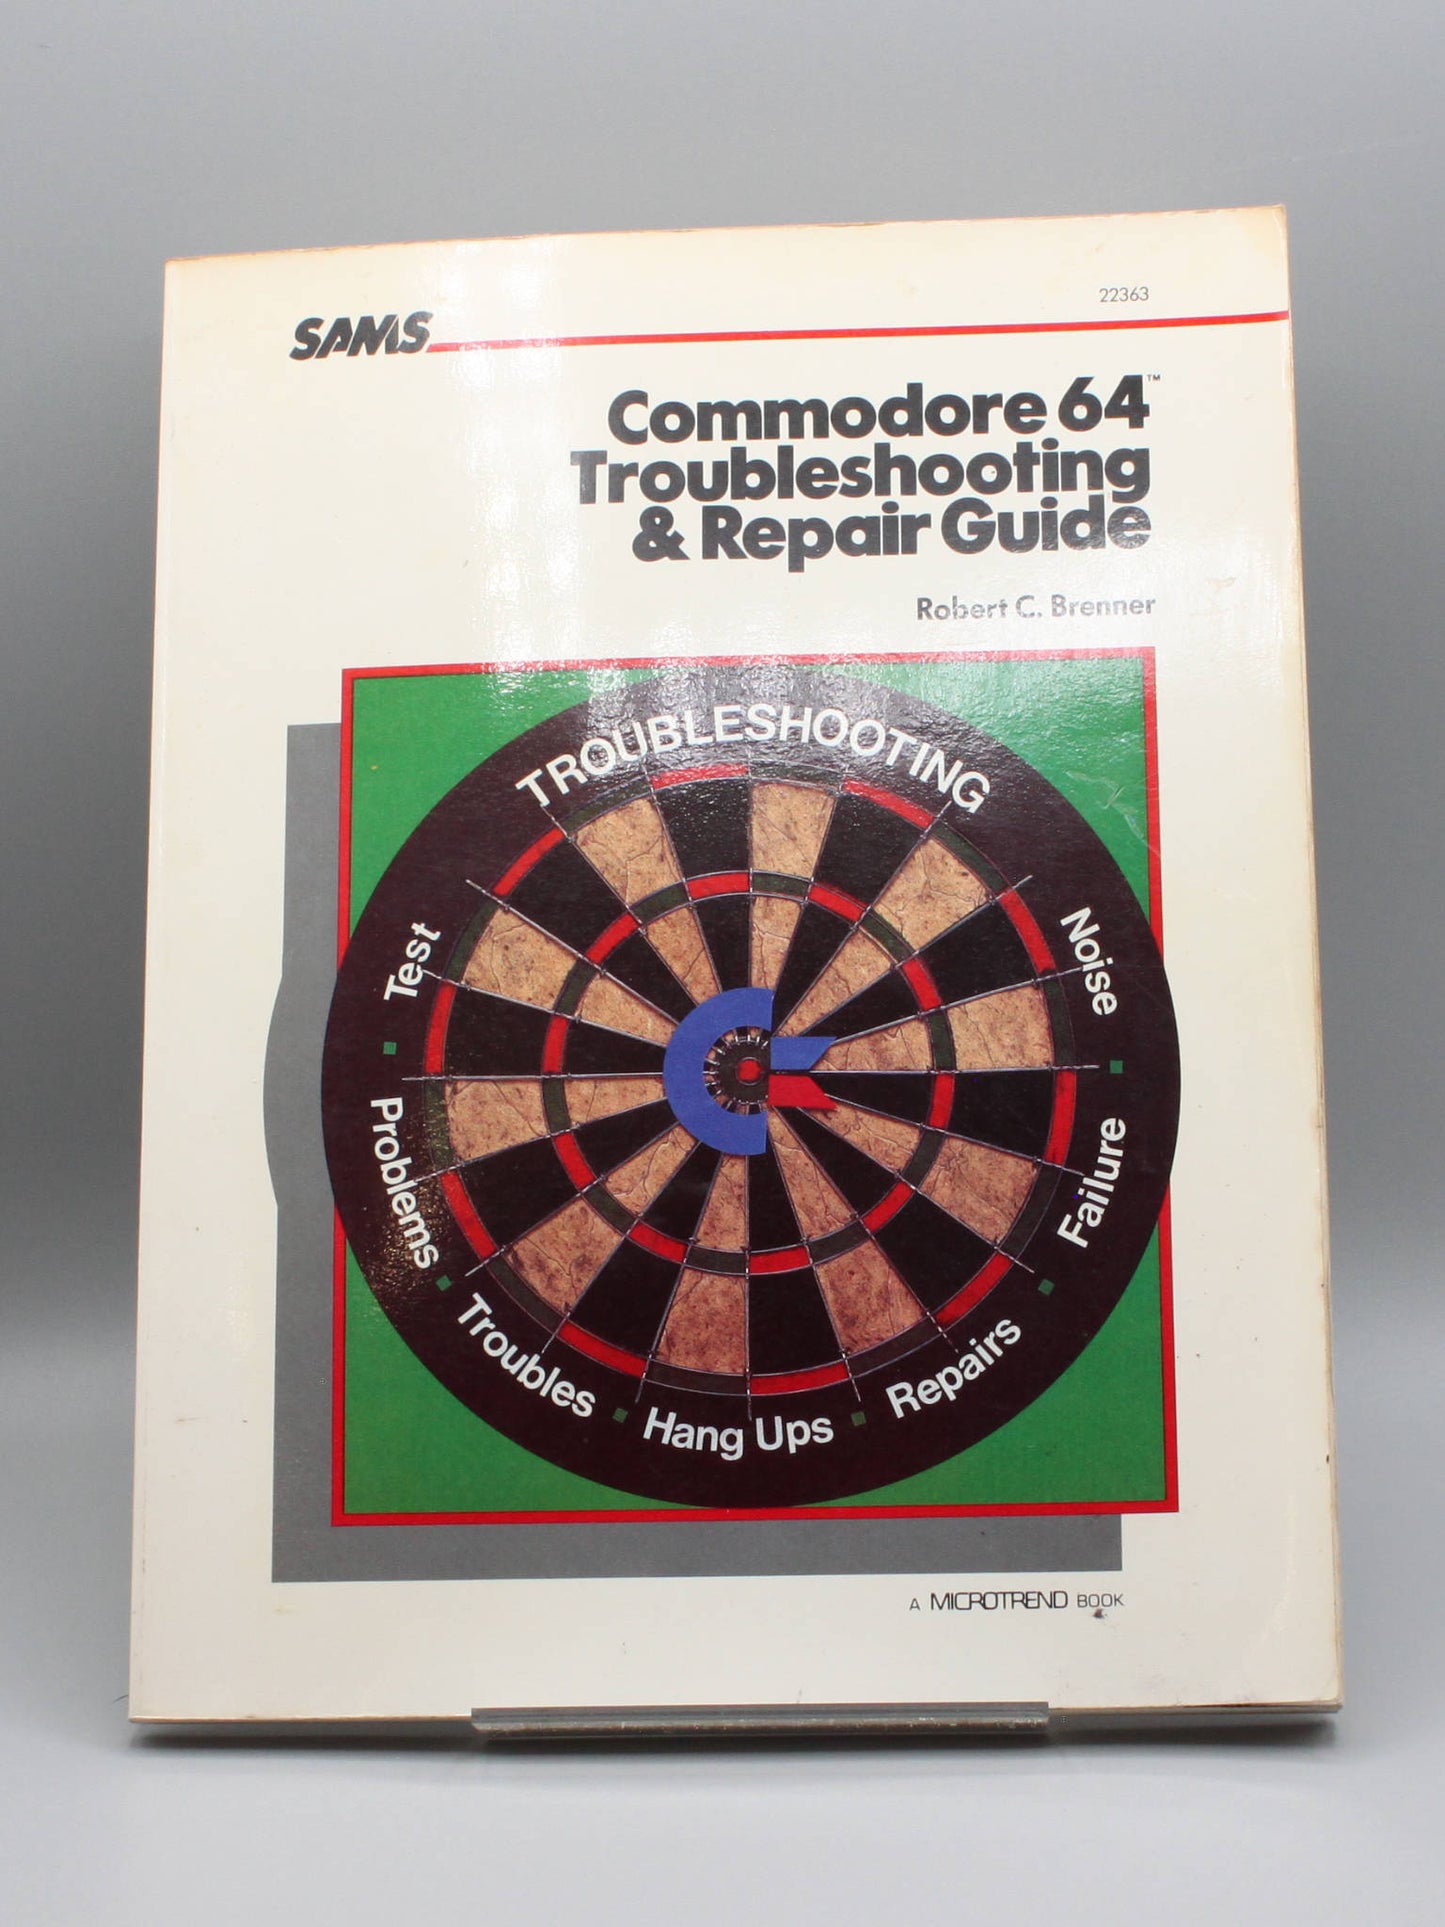 Commodore 64 Troubleshooting & Repair Guide